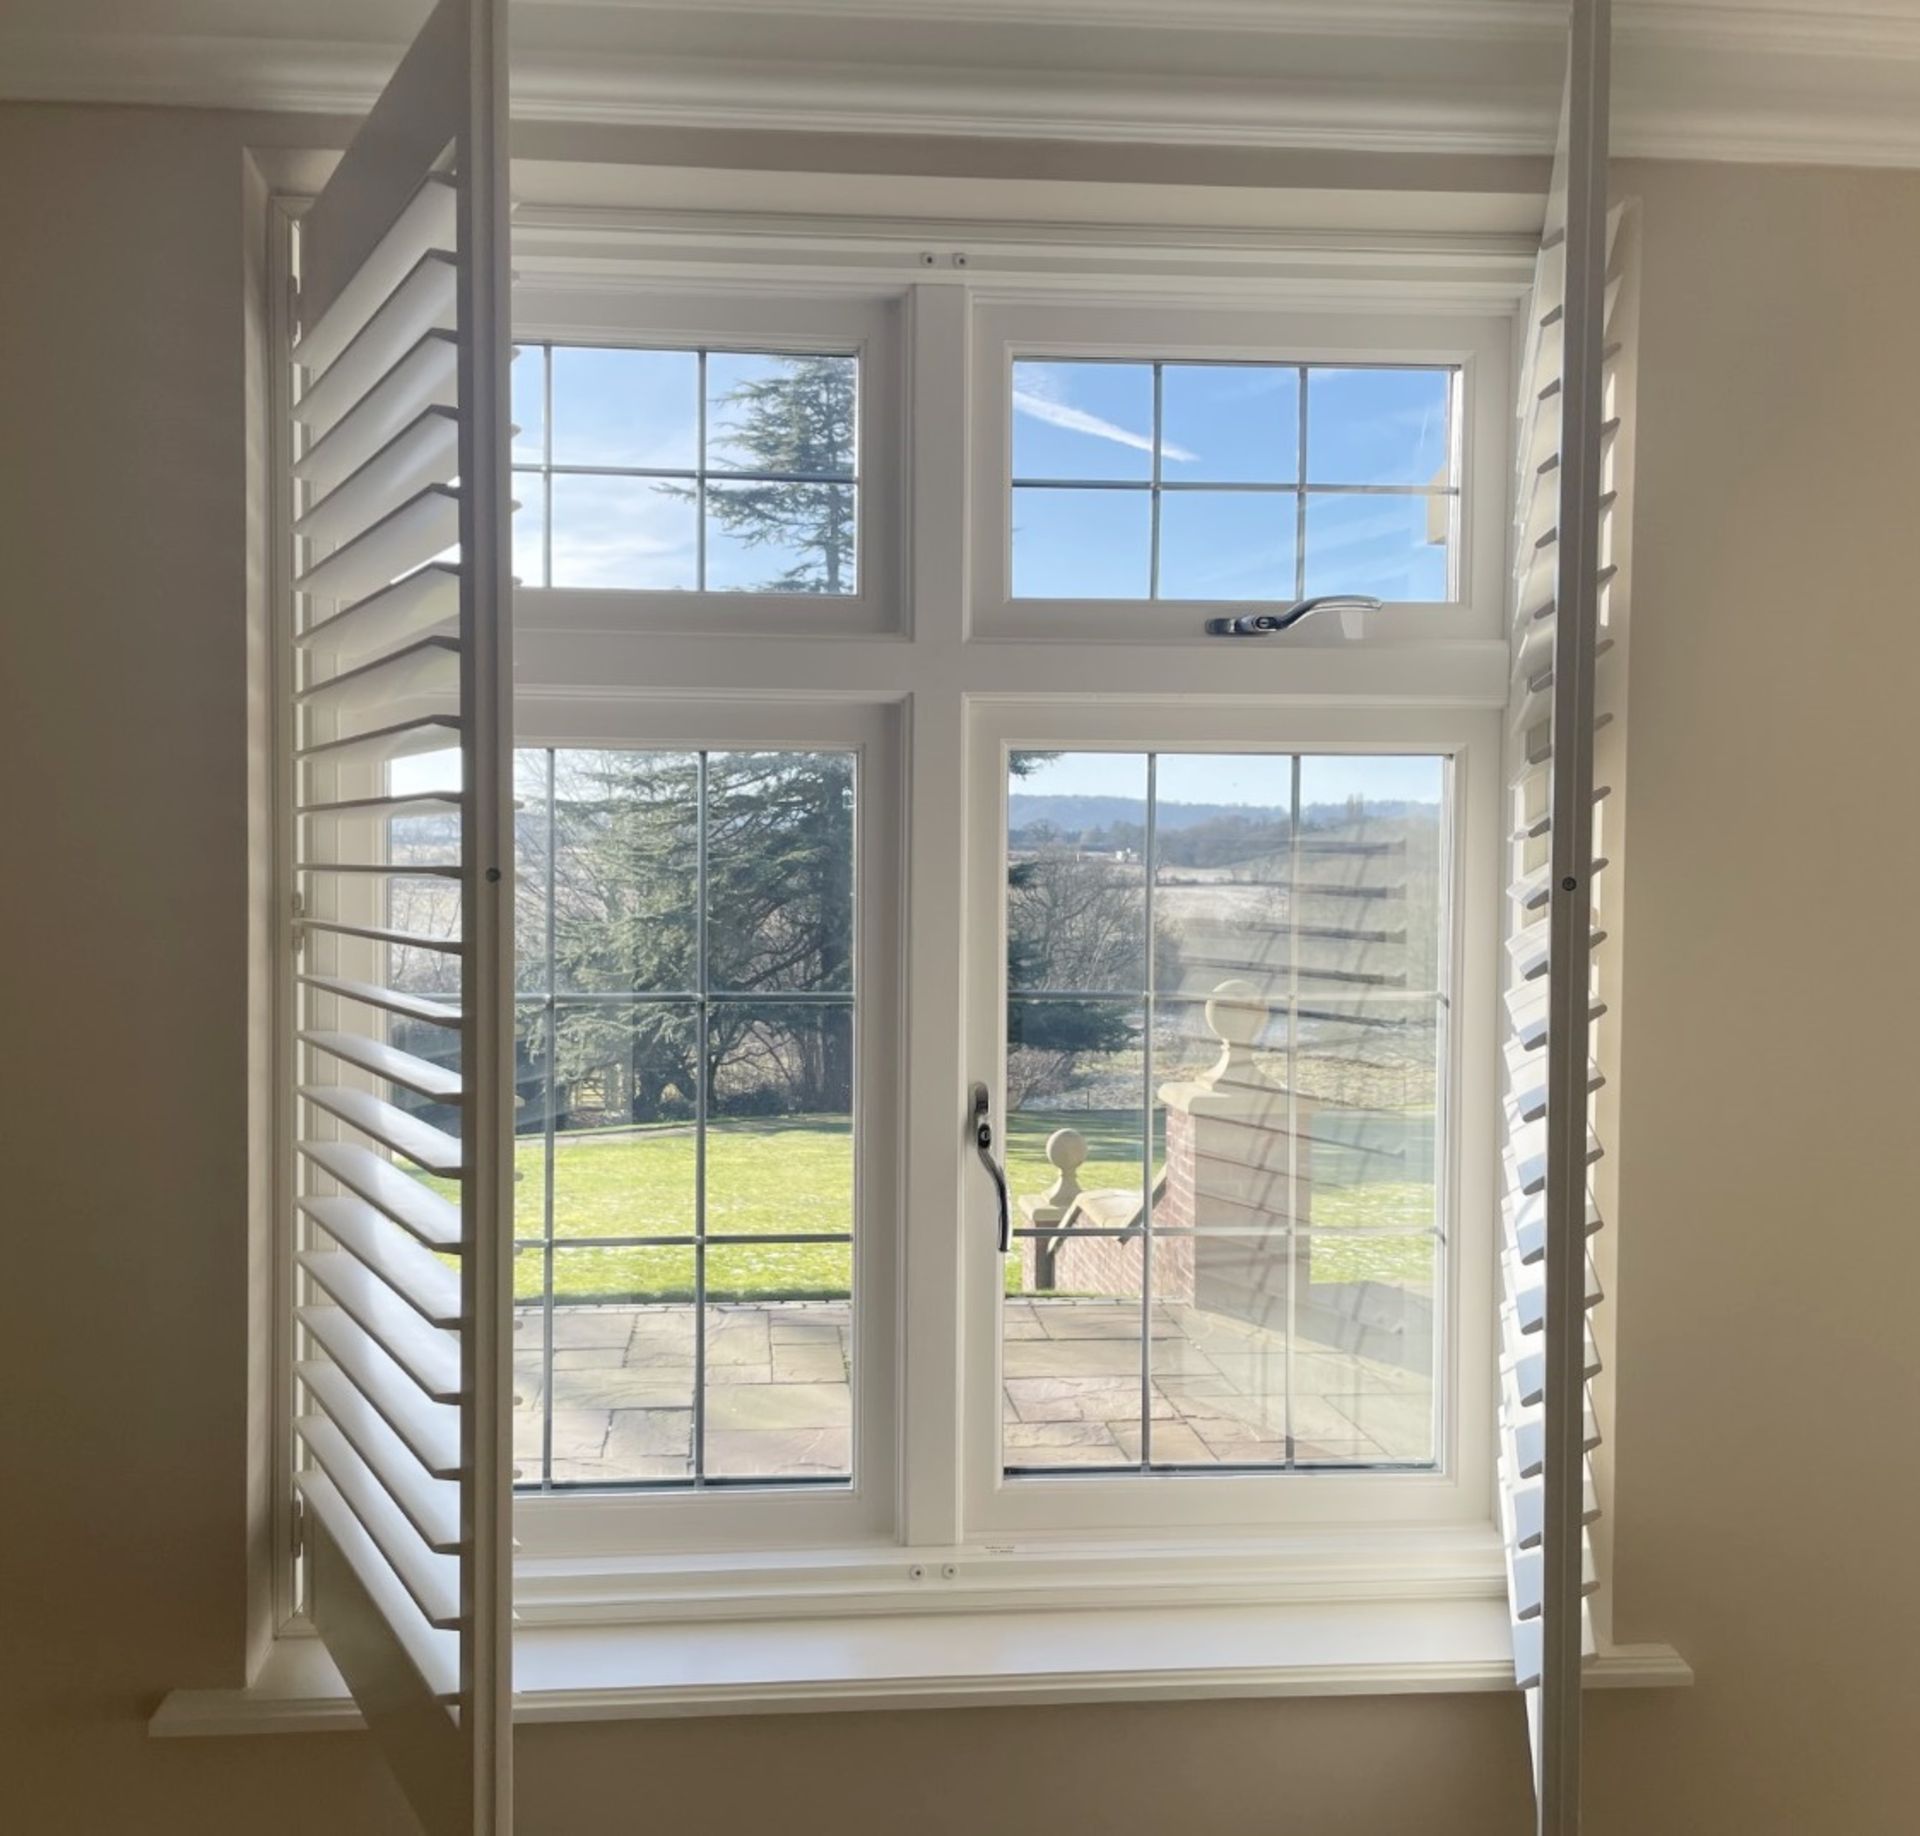 1 x Hardwood Timber Double Glazed Window Frames fitted with Shutter Blinds, In White - Ref: PAN105